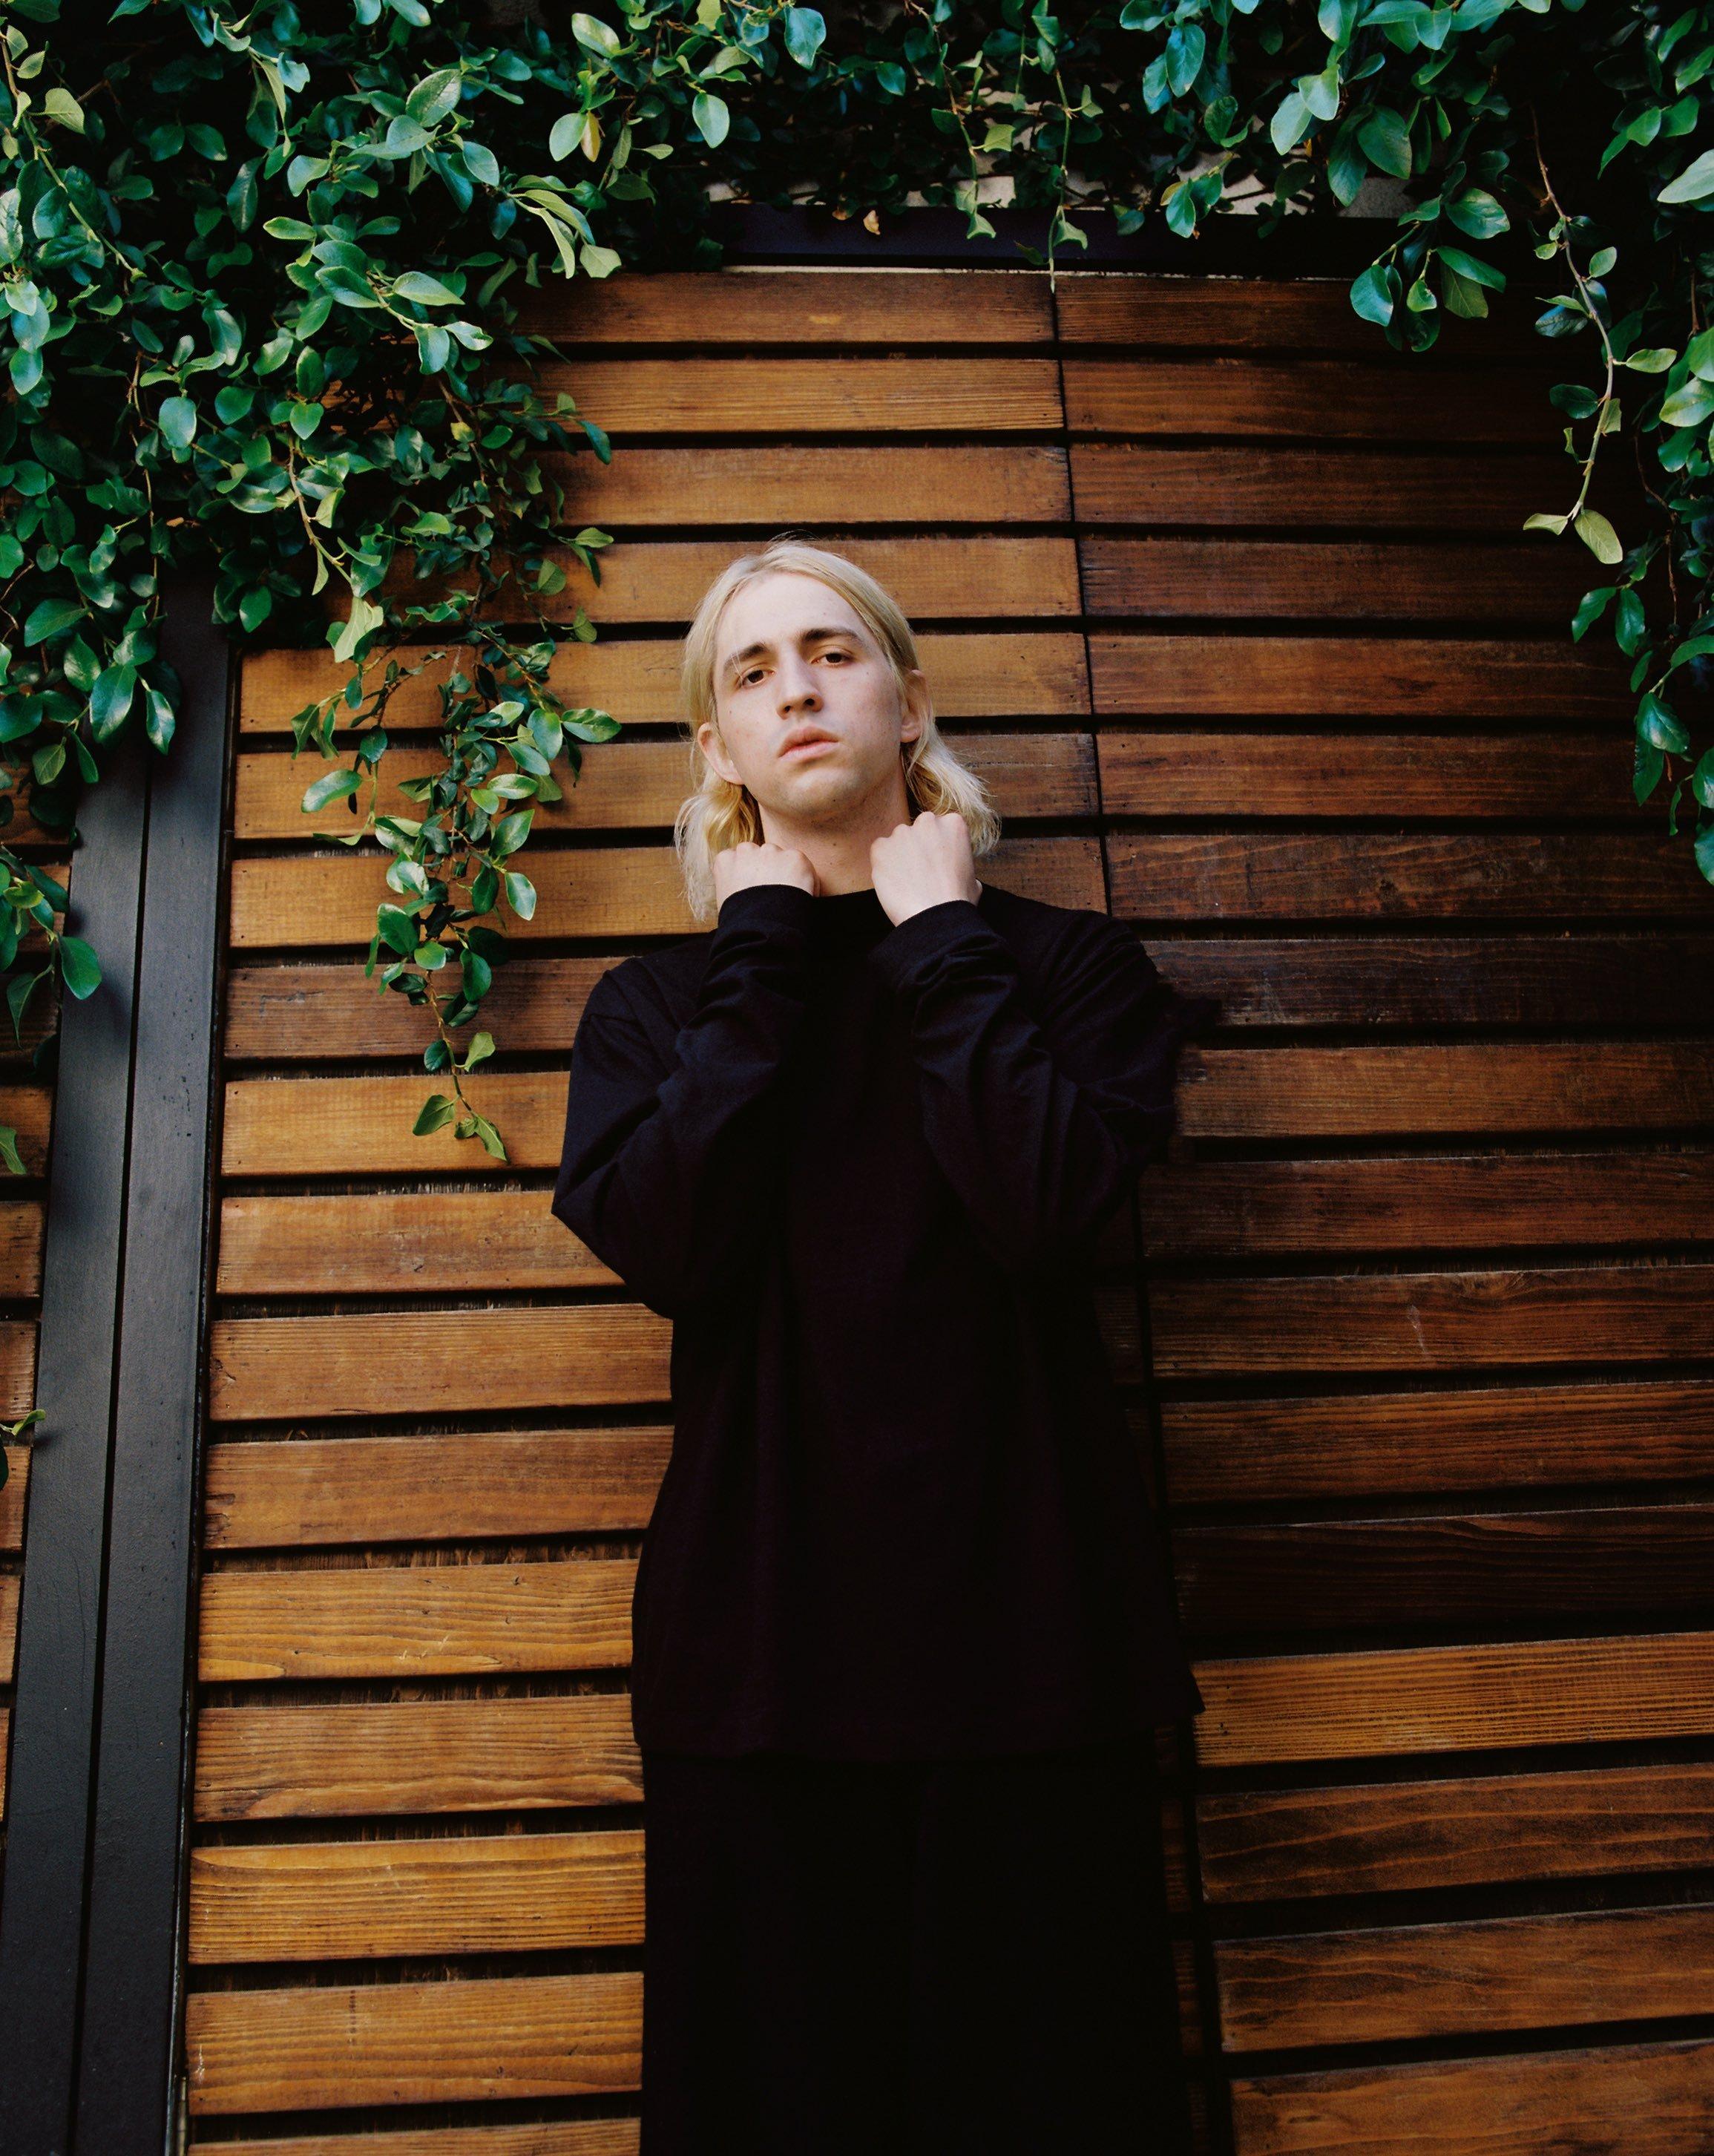 Porter Robinson poses in all-black, in front of a vine-covered fence